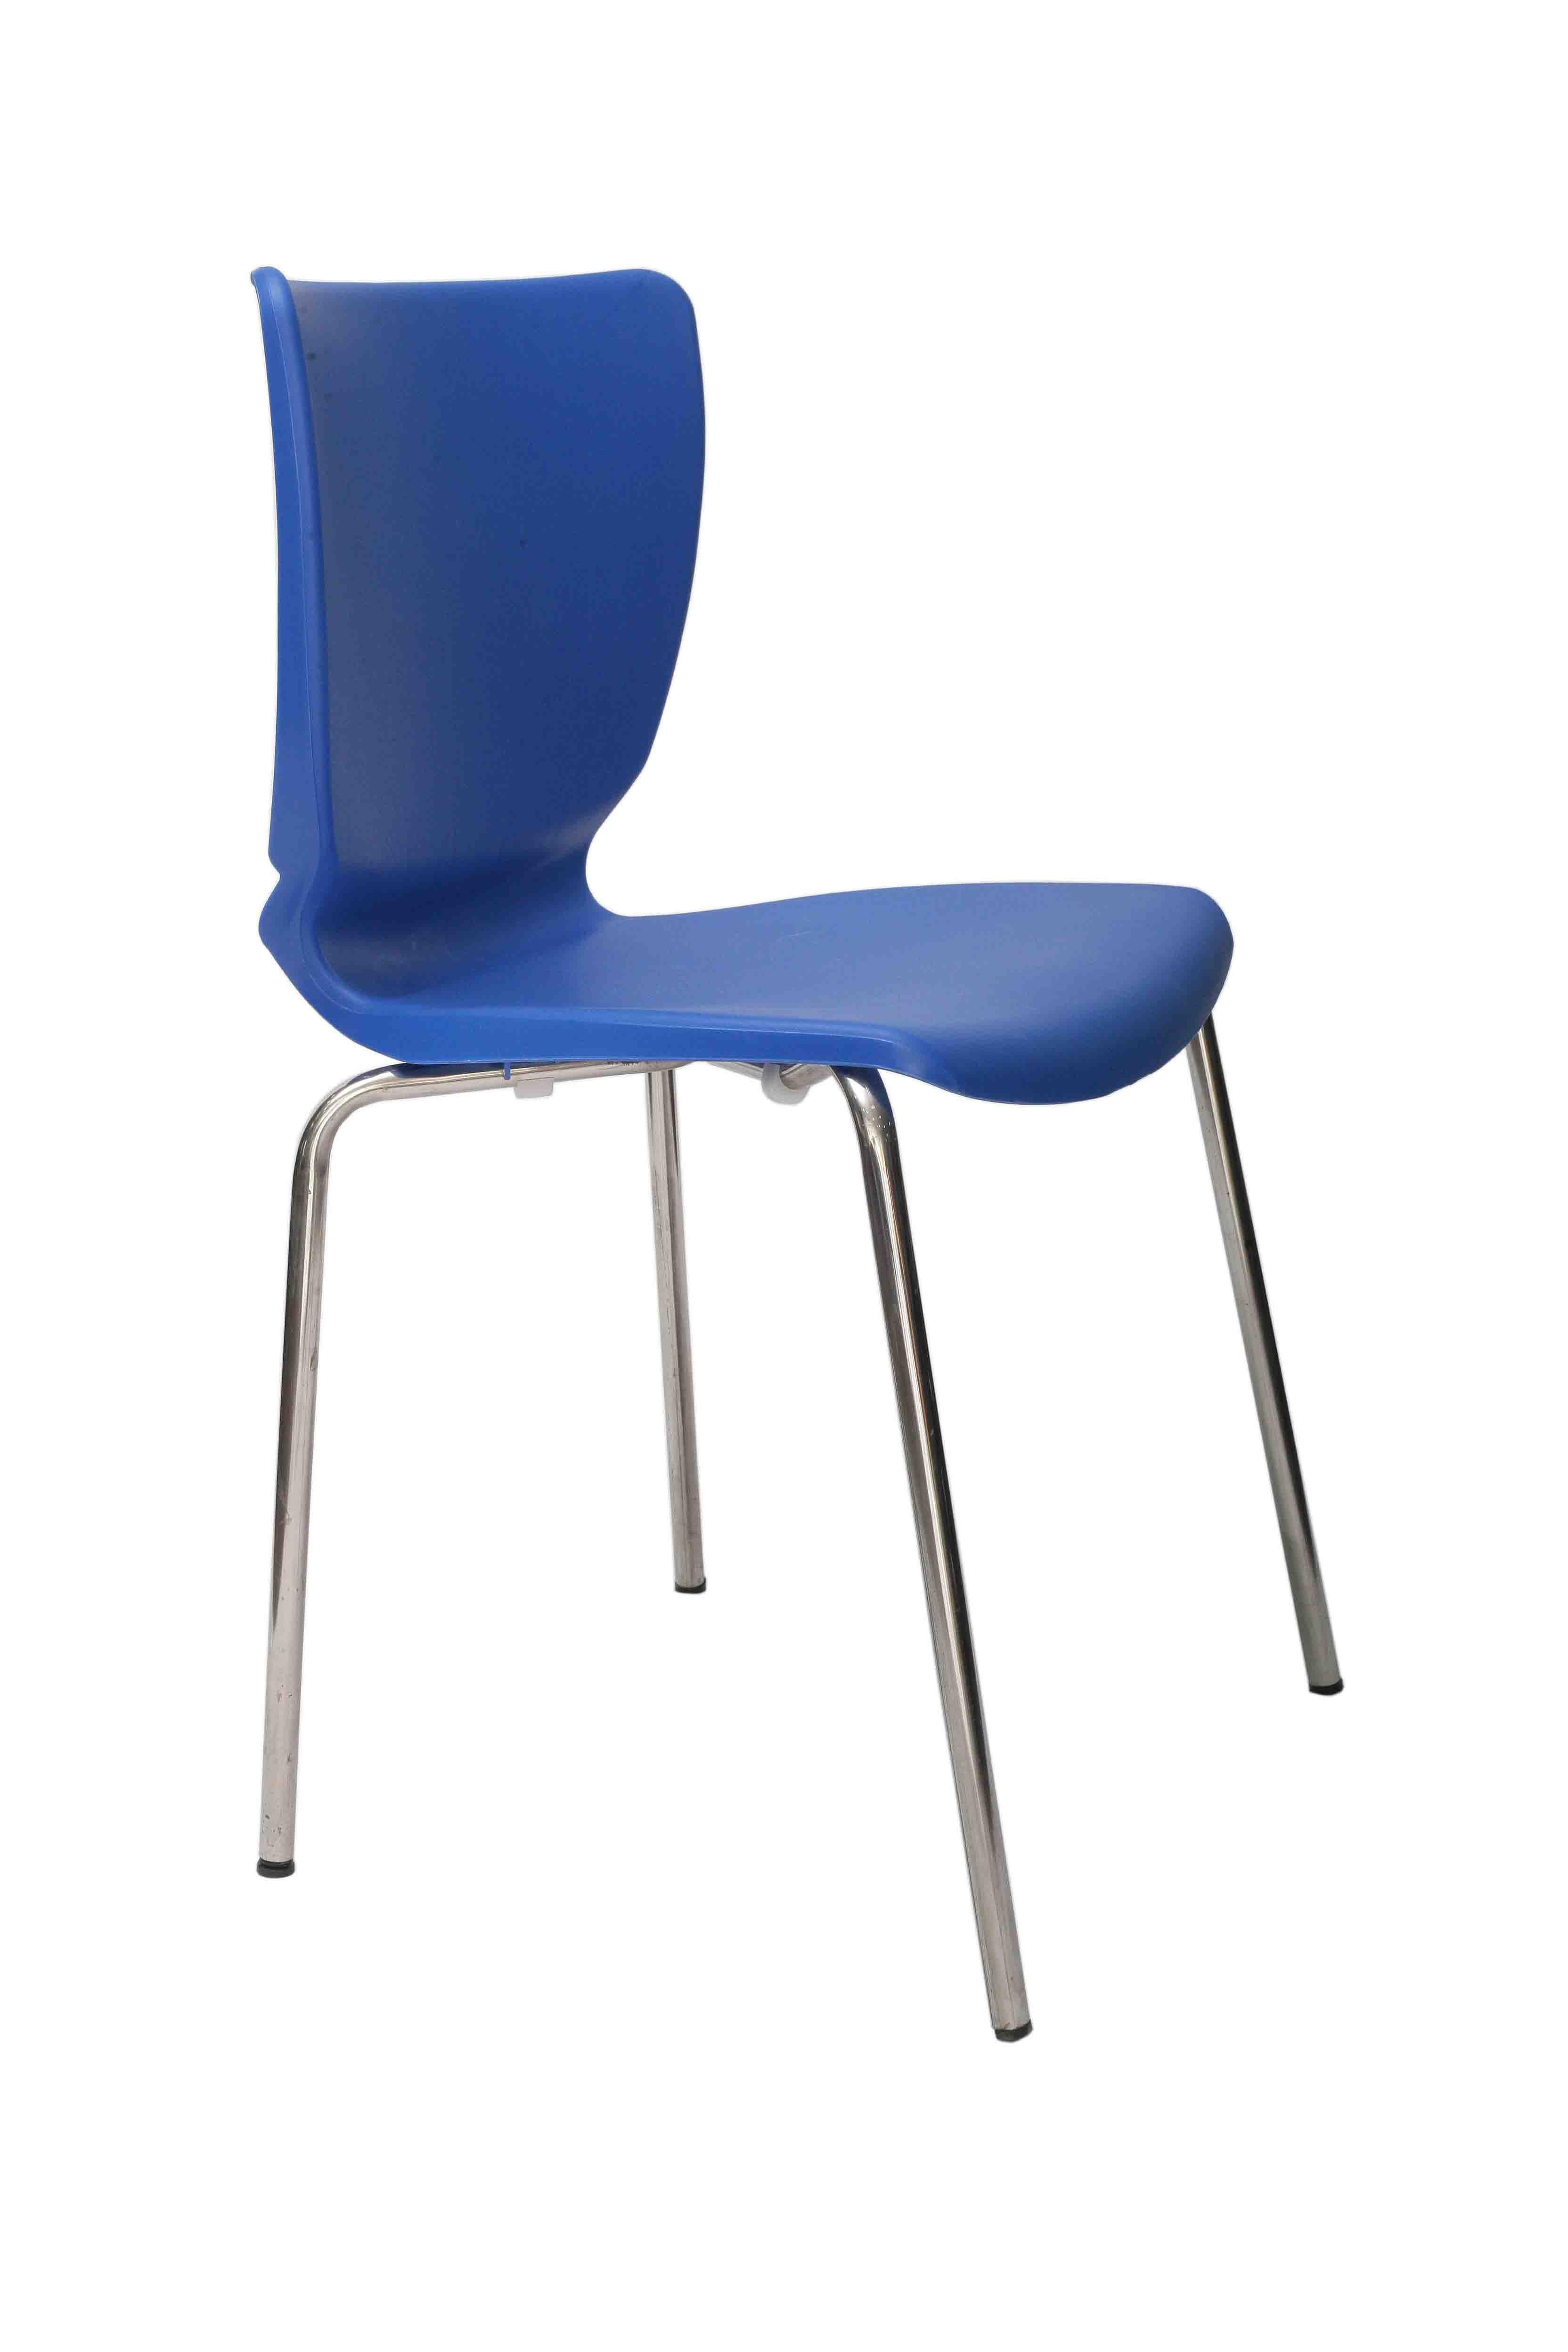 INGOLF Plastic Chair - Buy INGOLF Plastic Chair Online at Best Prices